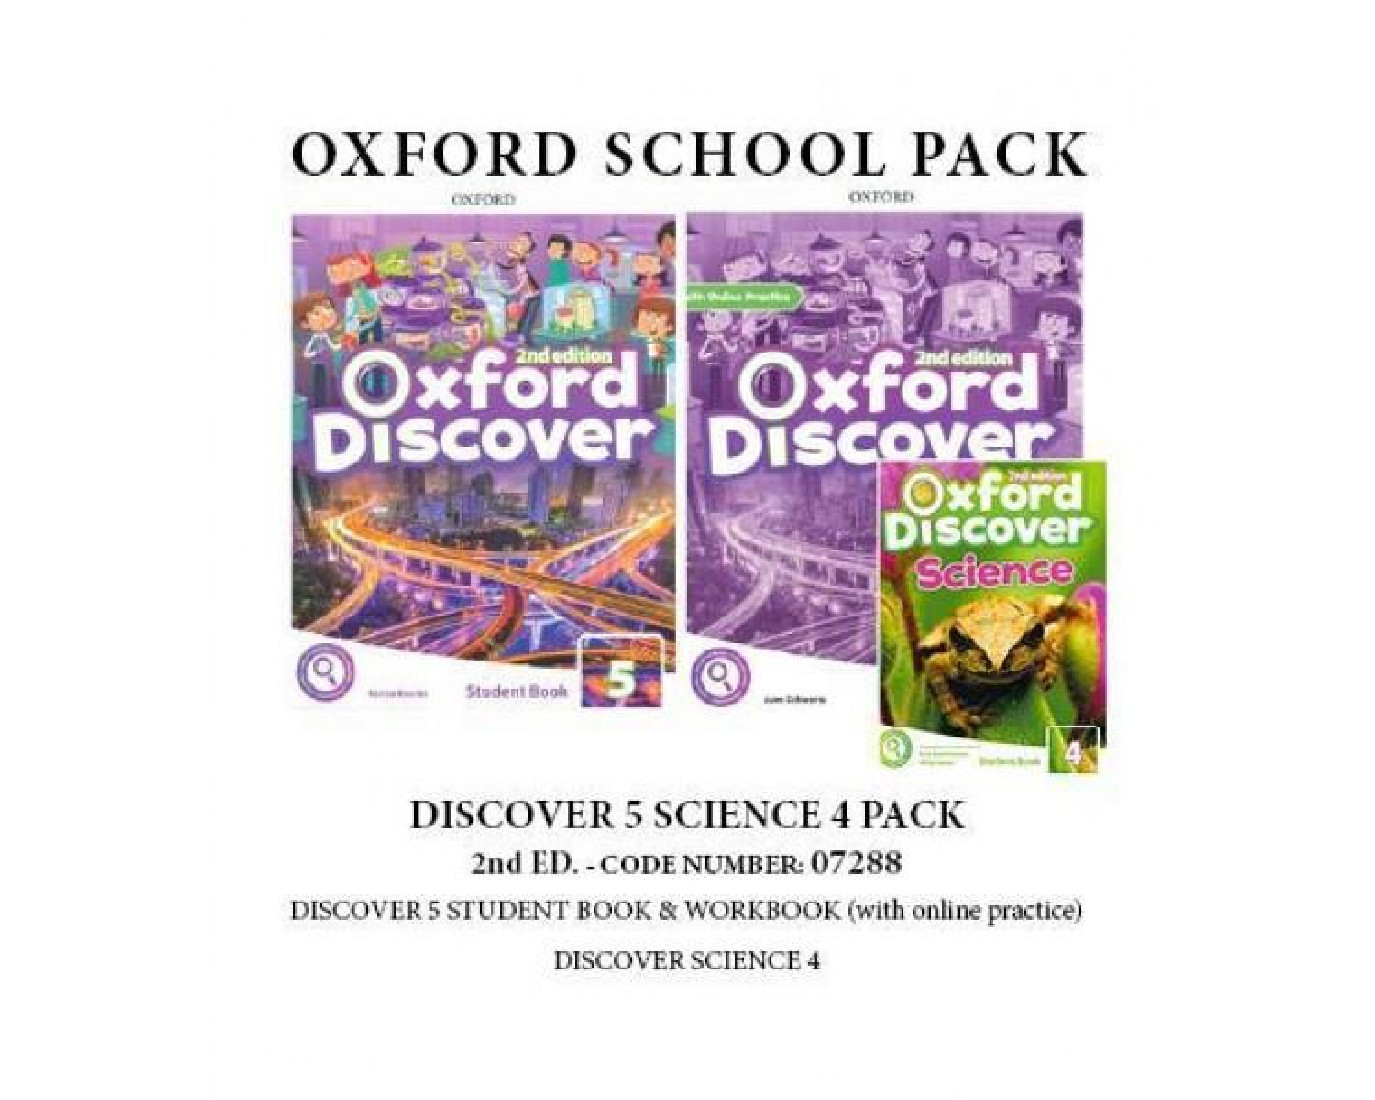 DISCOVER 5 2ND ED SCIENCE 4 PACK - 07288